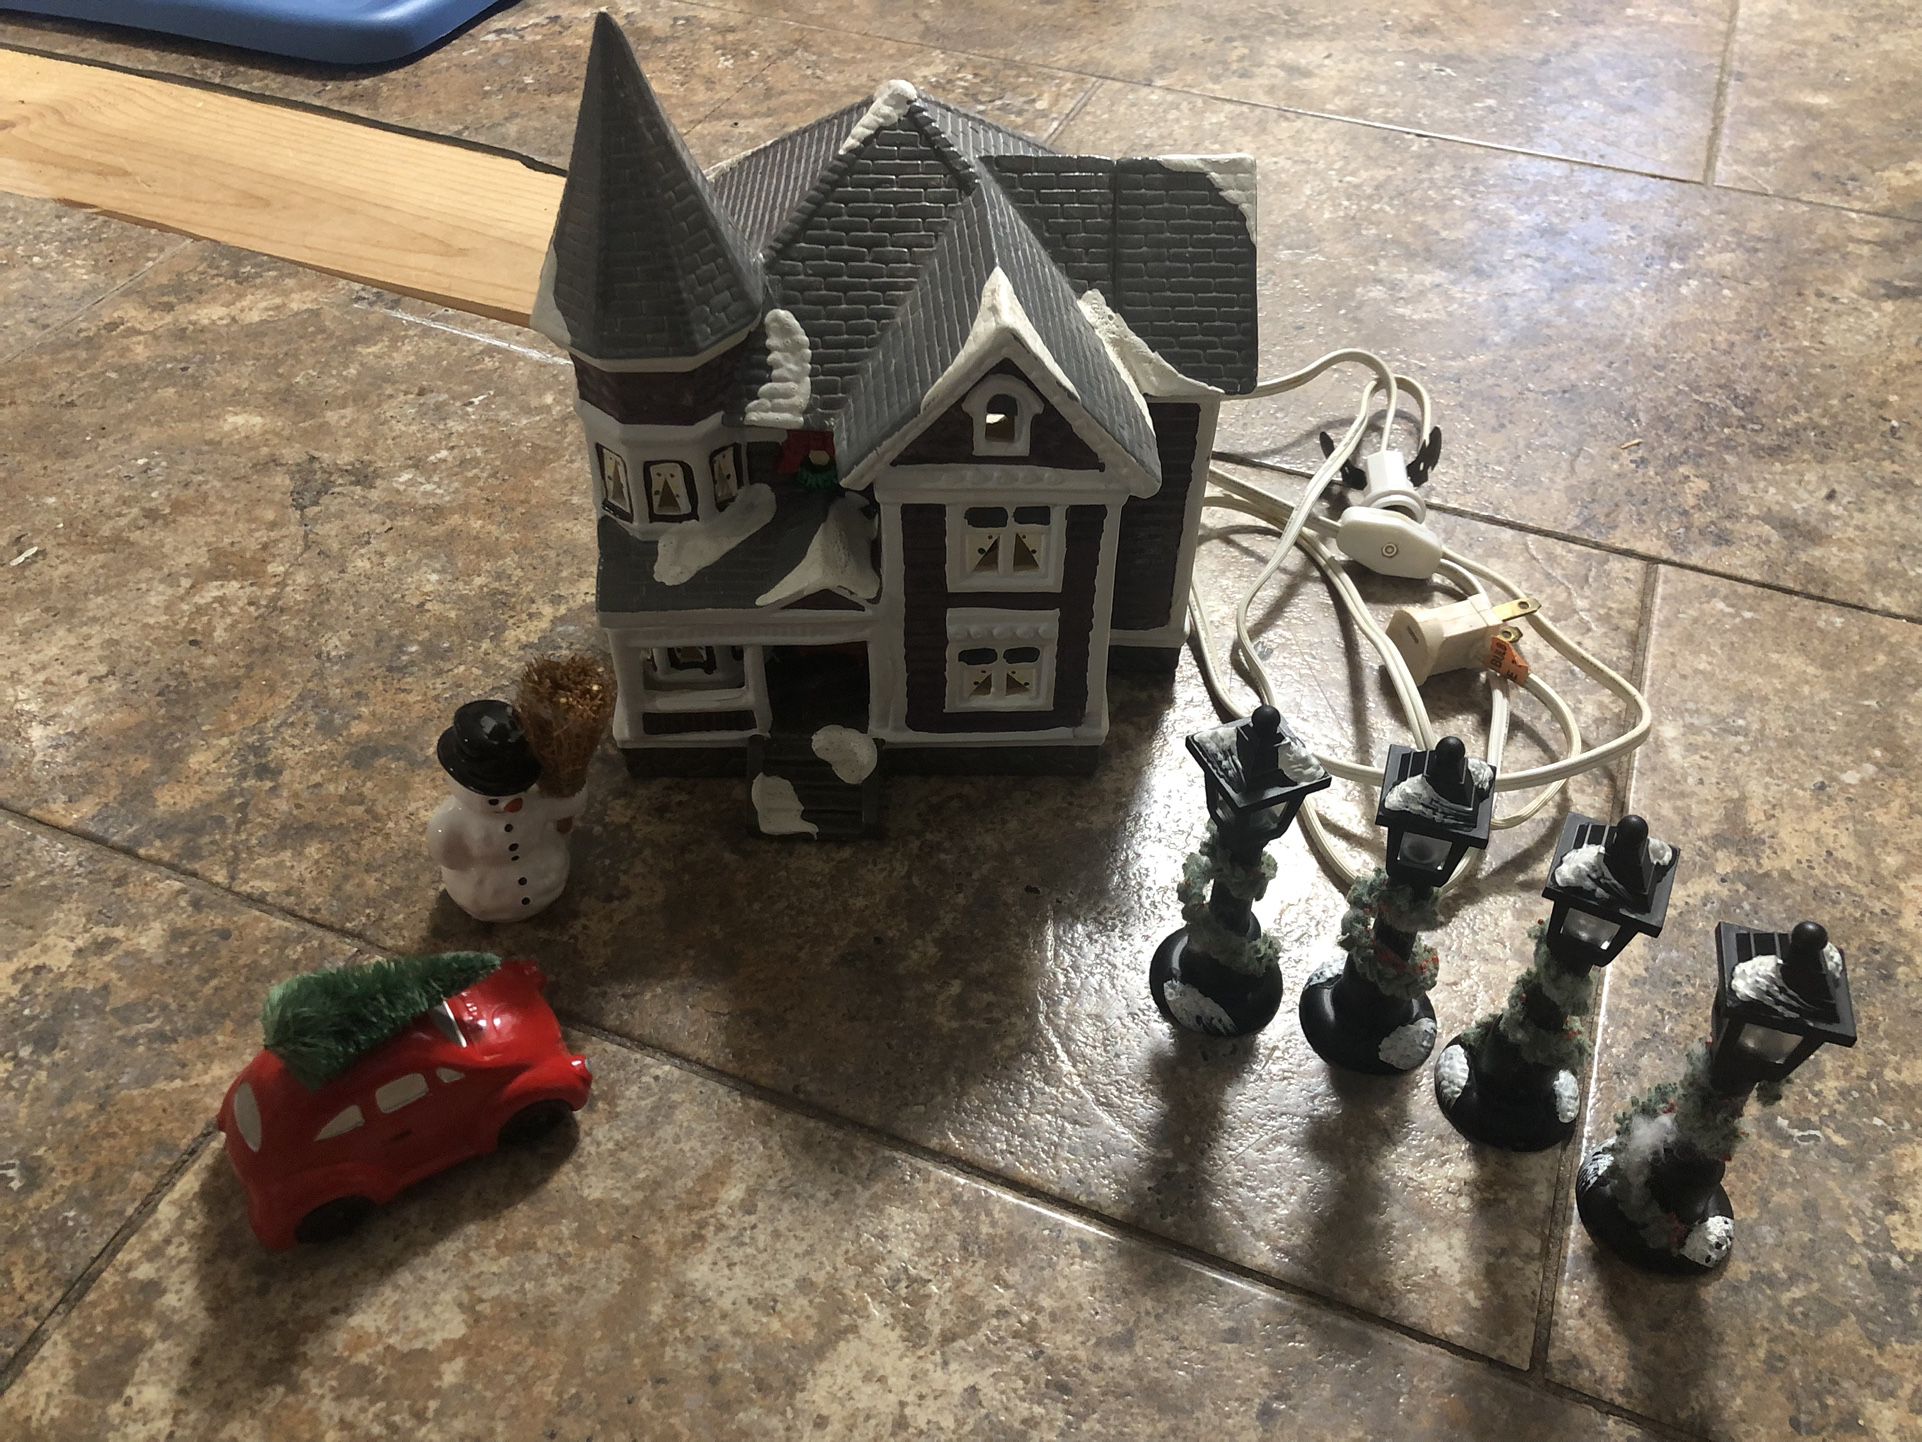 1986 Snow house By Dept 56.